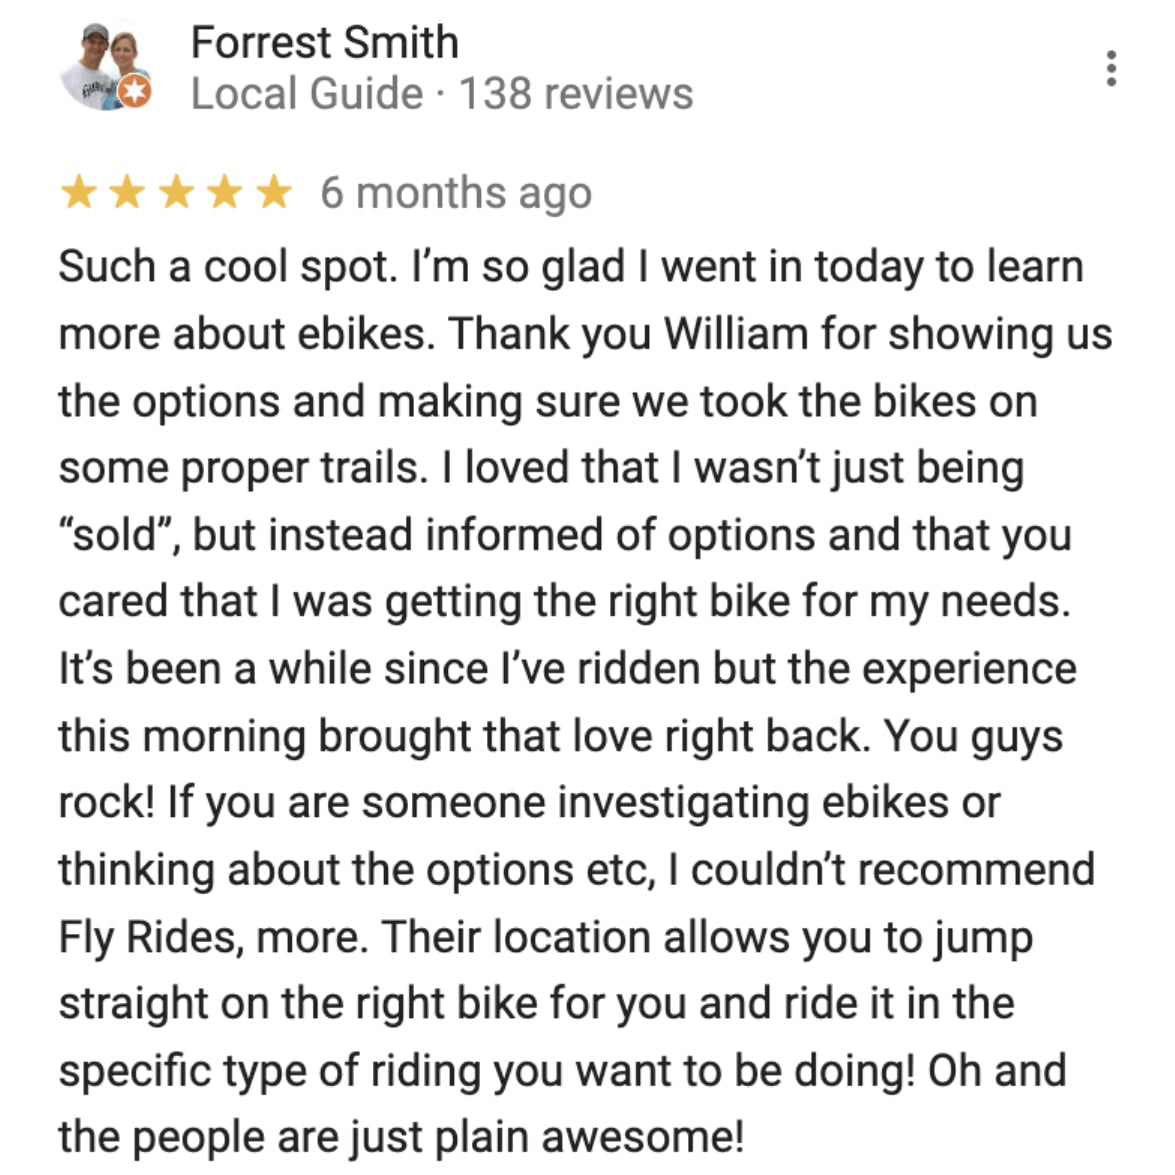 San Diego Fly Rides Customer Review by Forrest